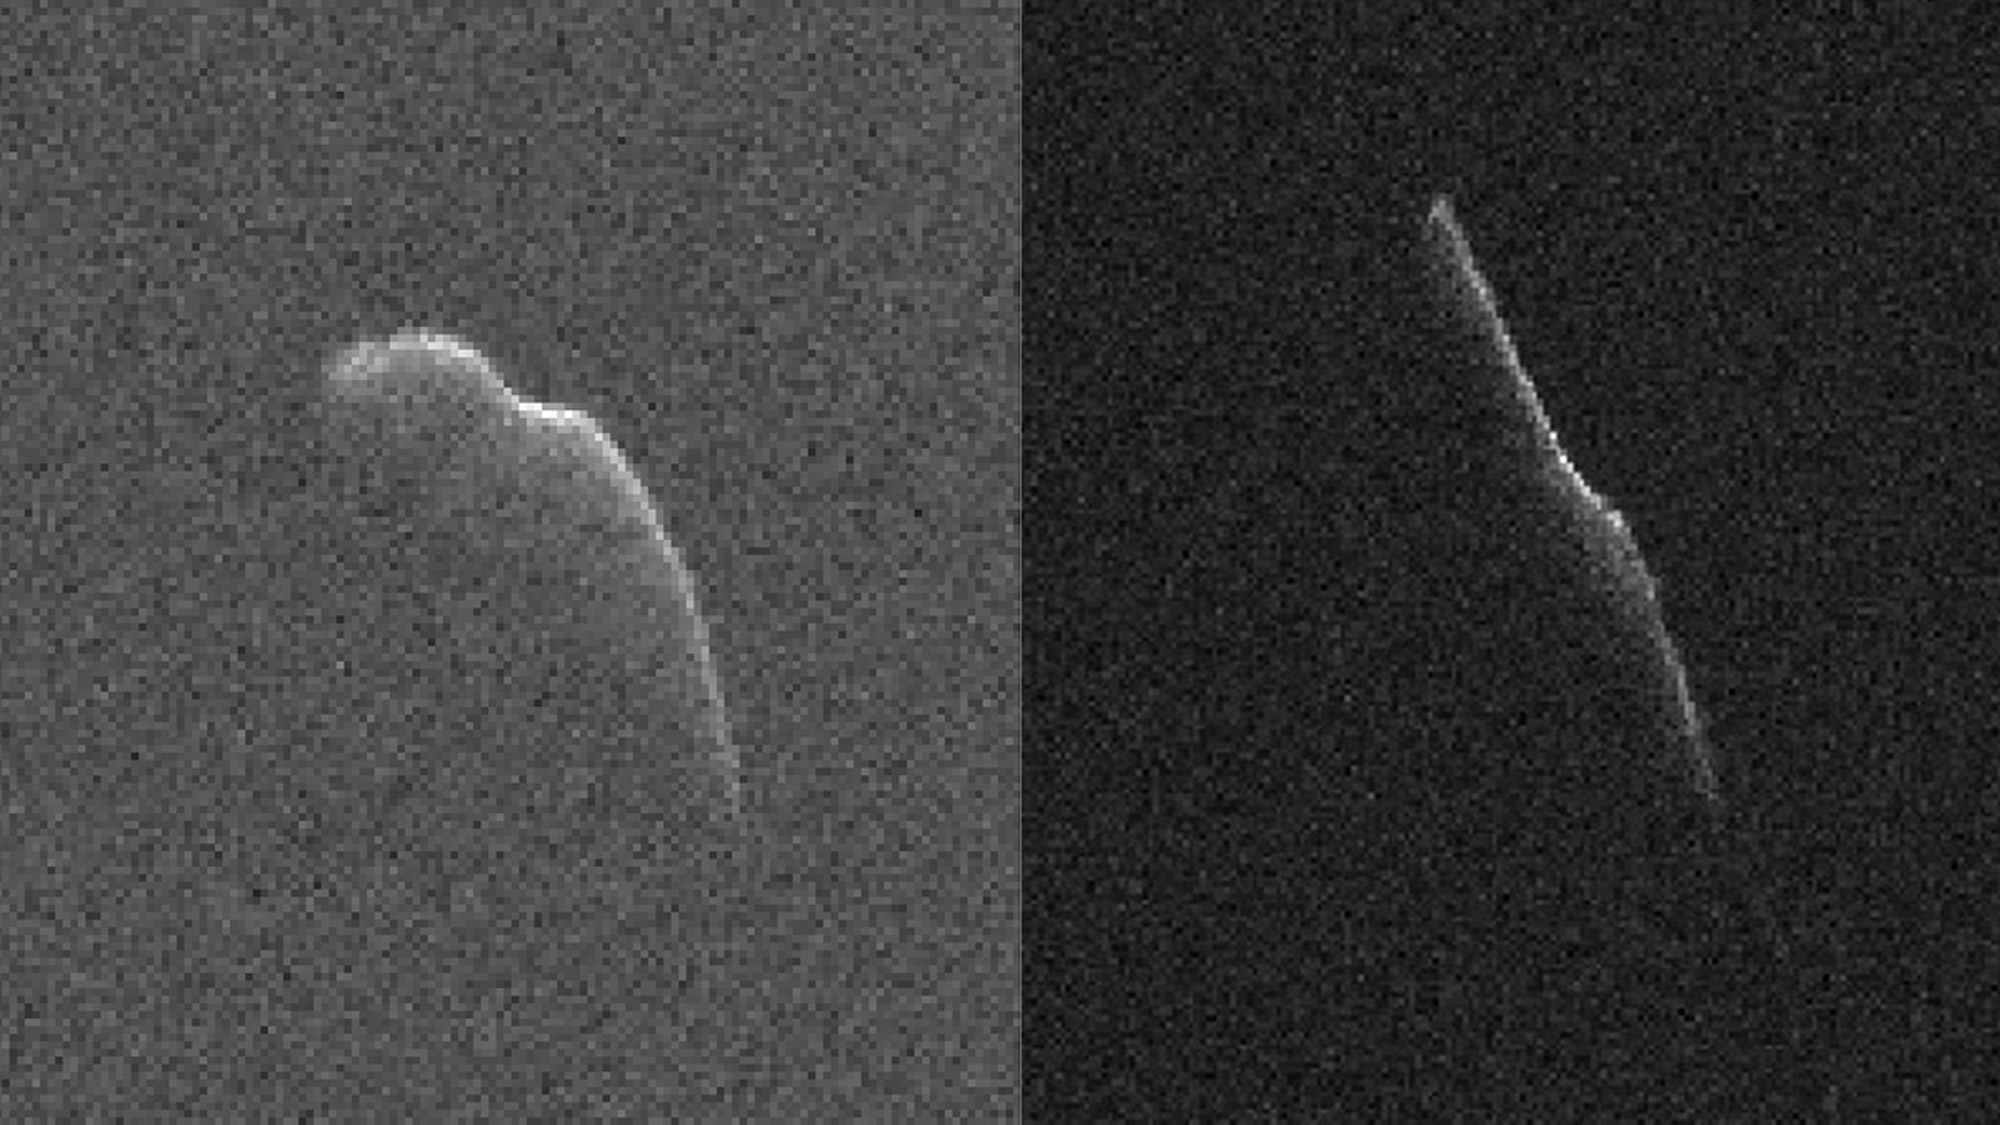 An asteroid will safely fly past Earth at a distance of 6.8 million miles on Dec. 24.